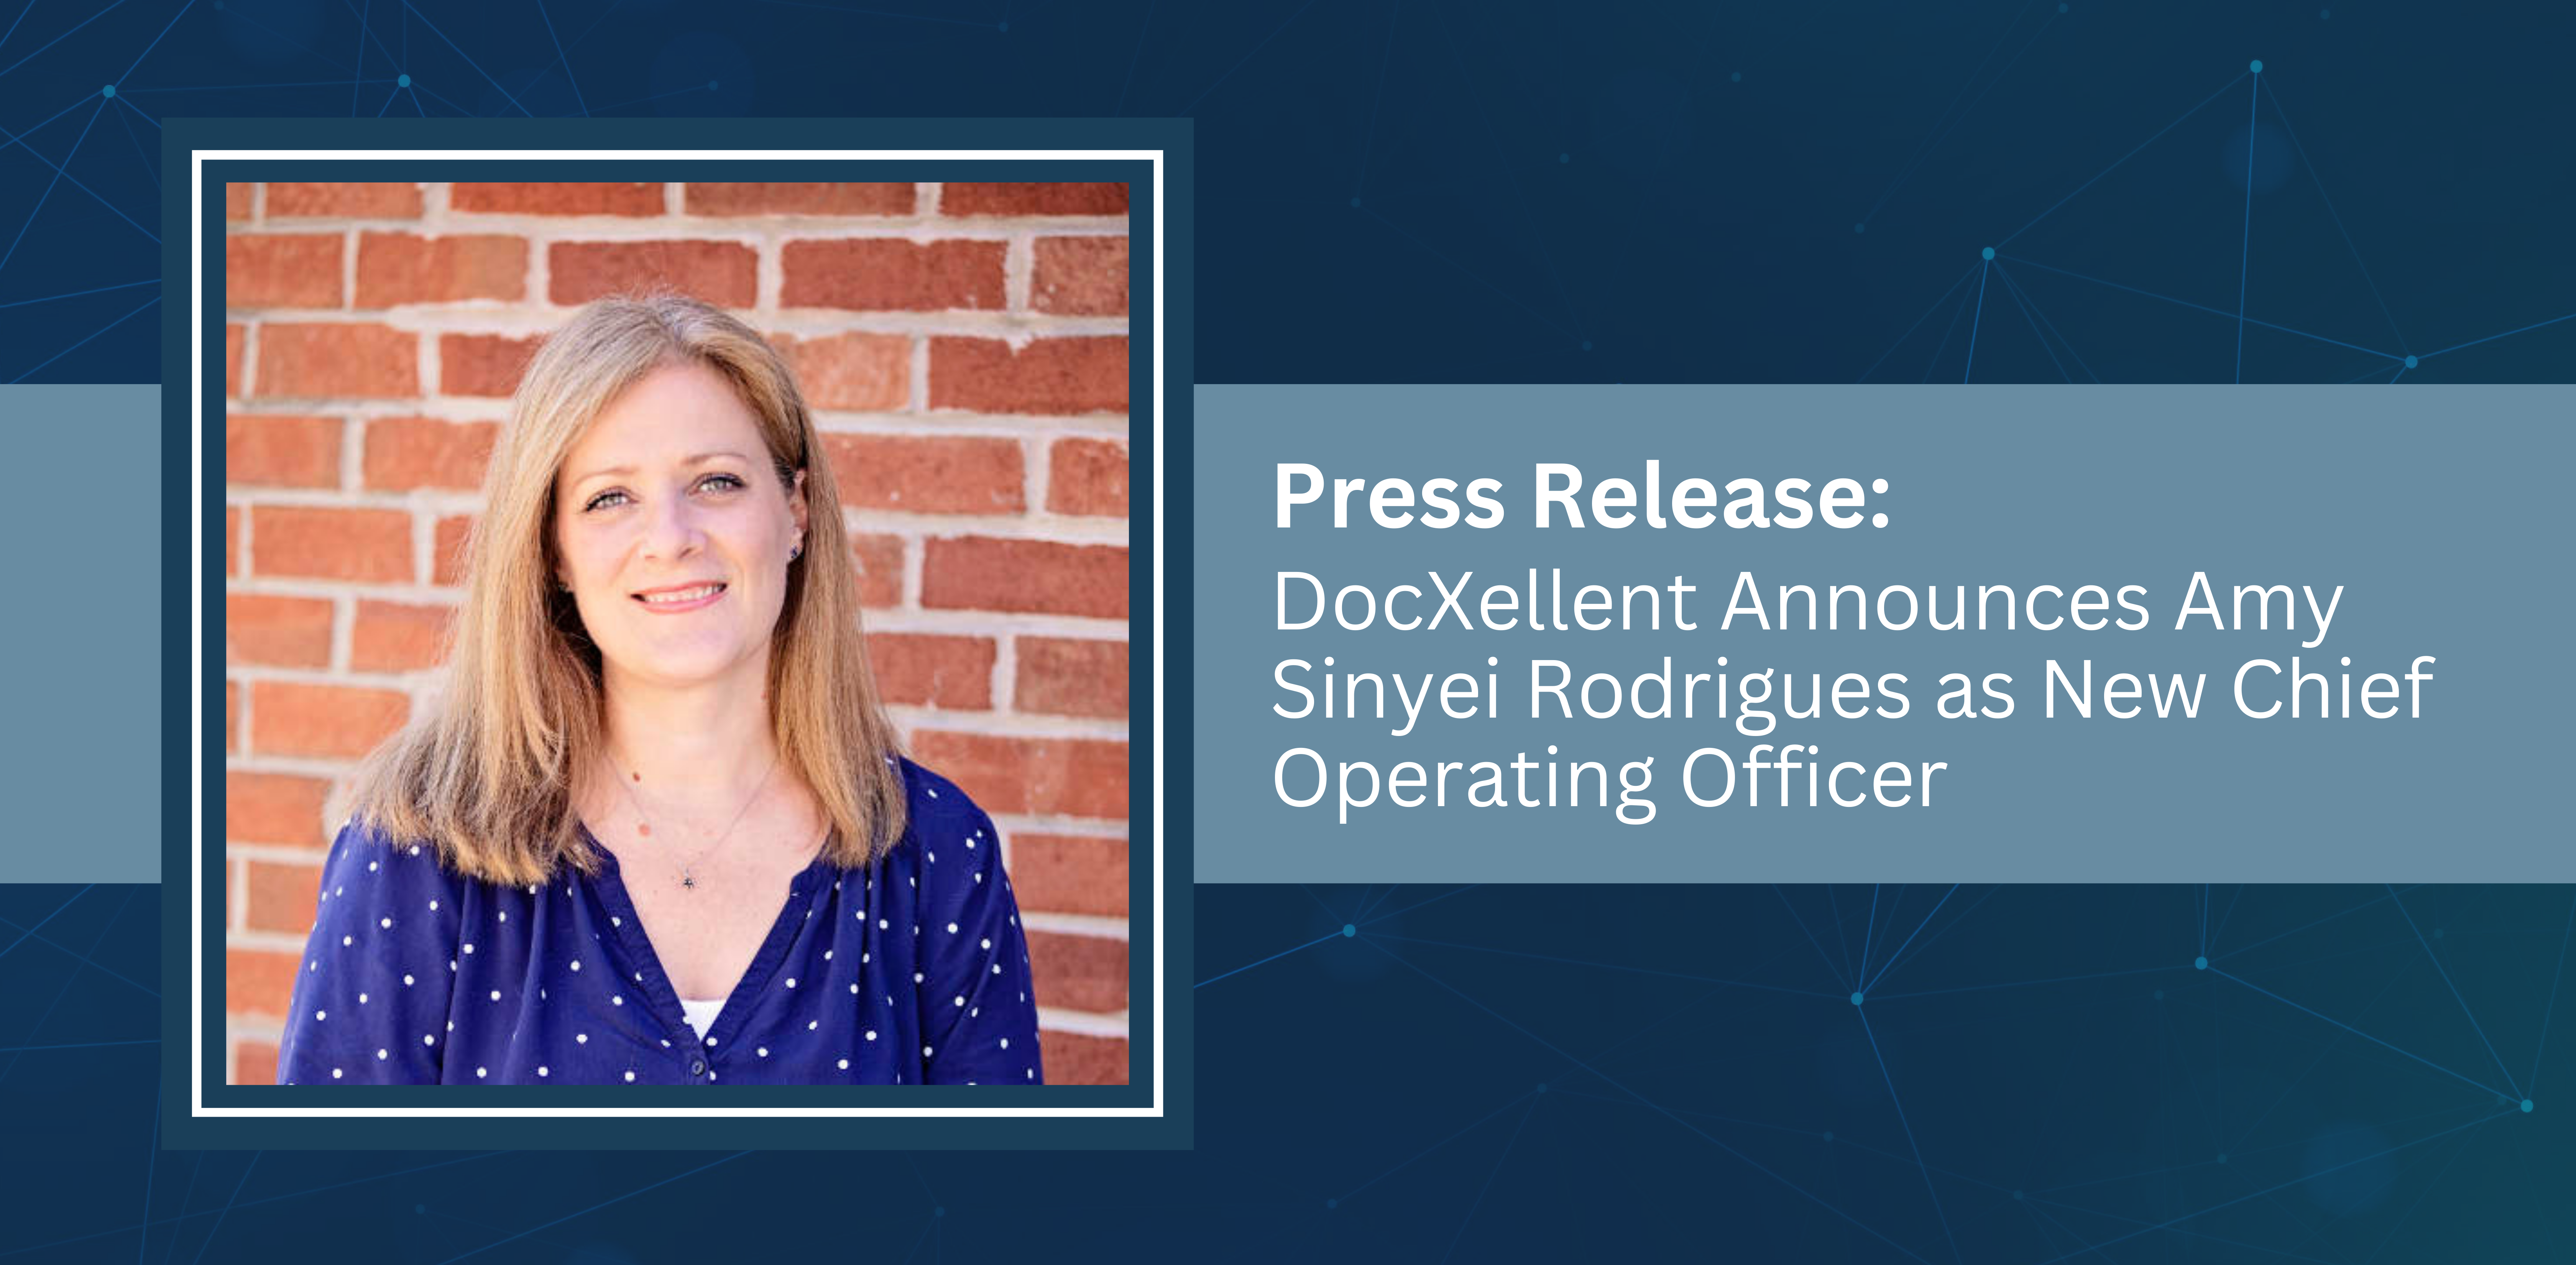 DocXellent Announces Amy Sinyei Rodrigues as New Chief Operating Officer